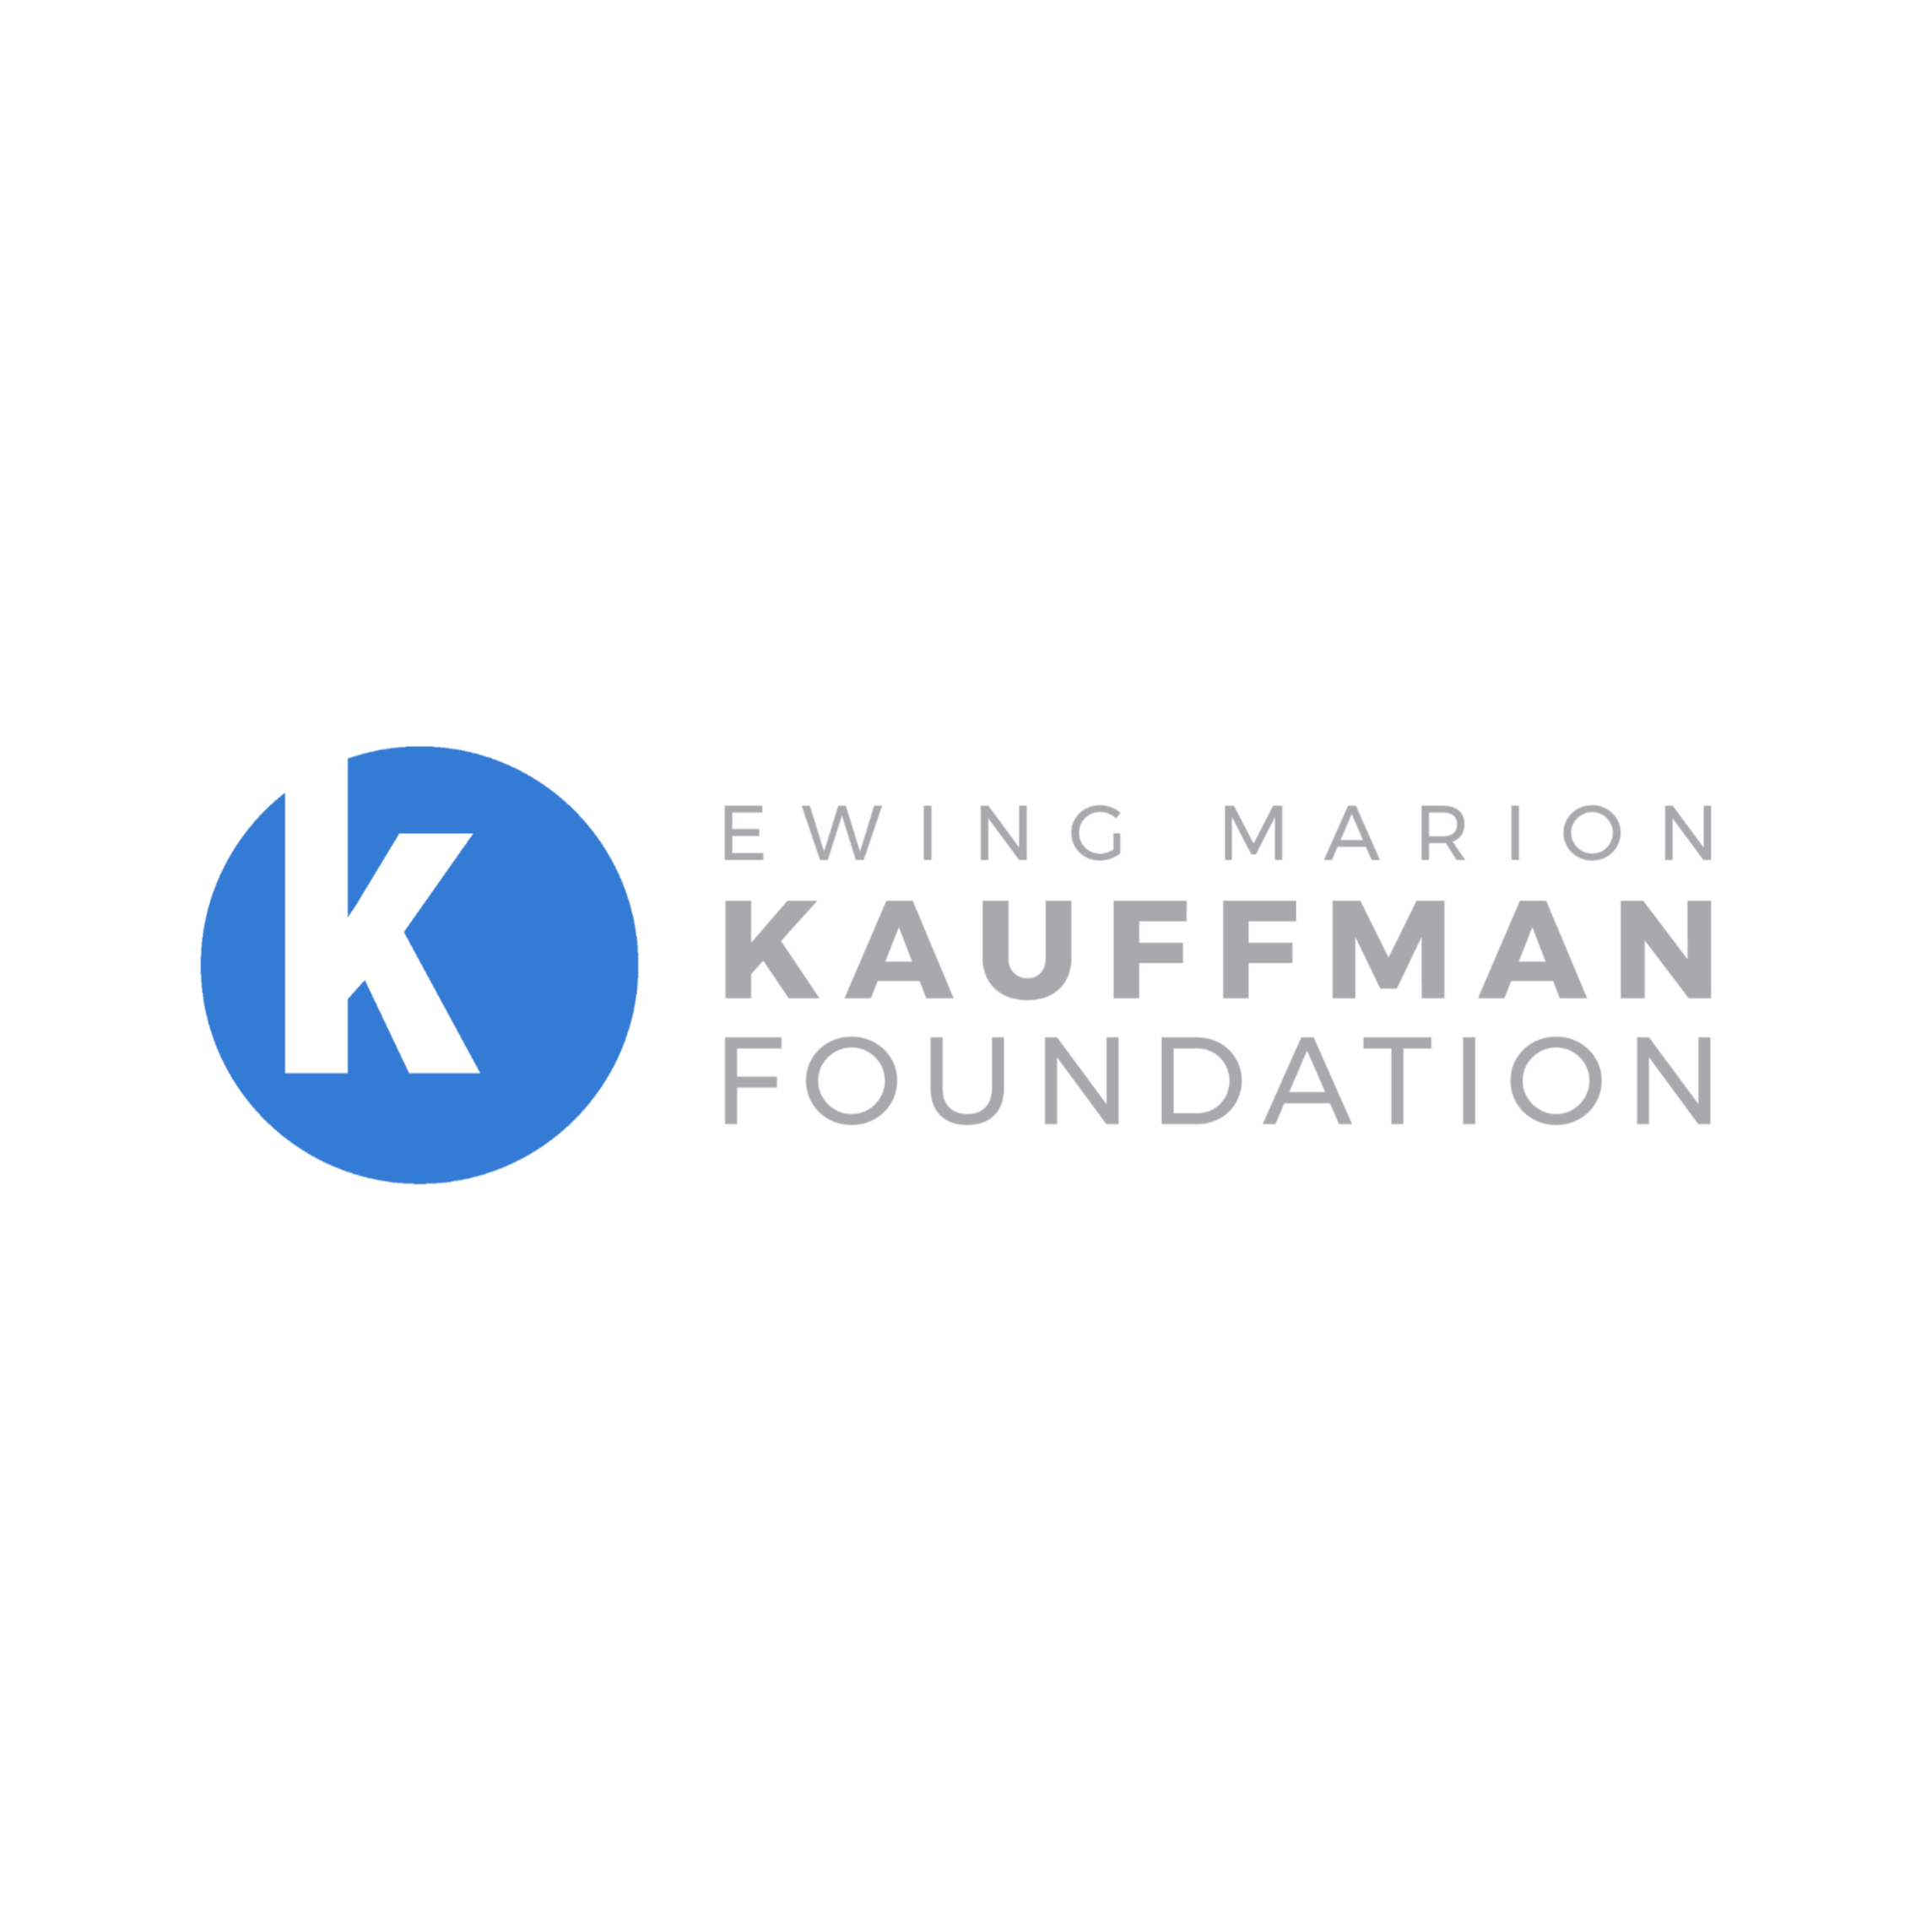 Ewing Marion Kauffman Foundation supports theClubhou.se